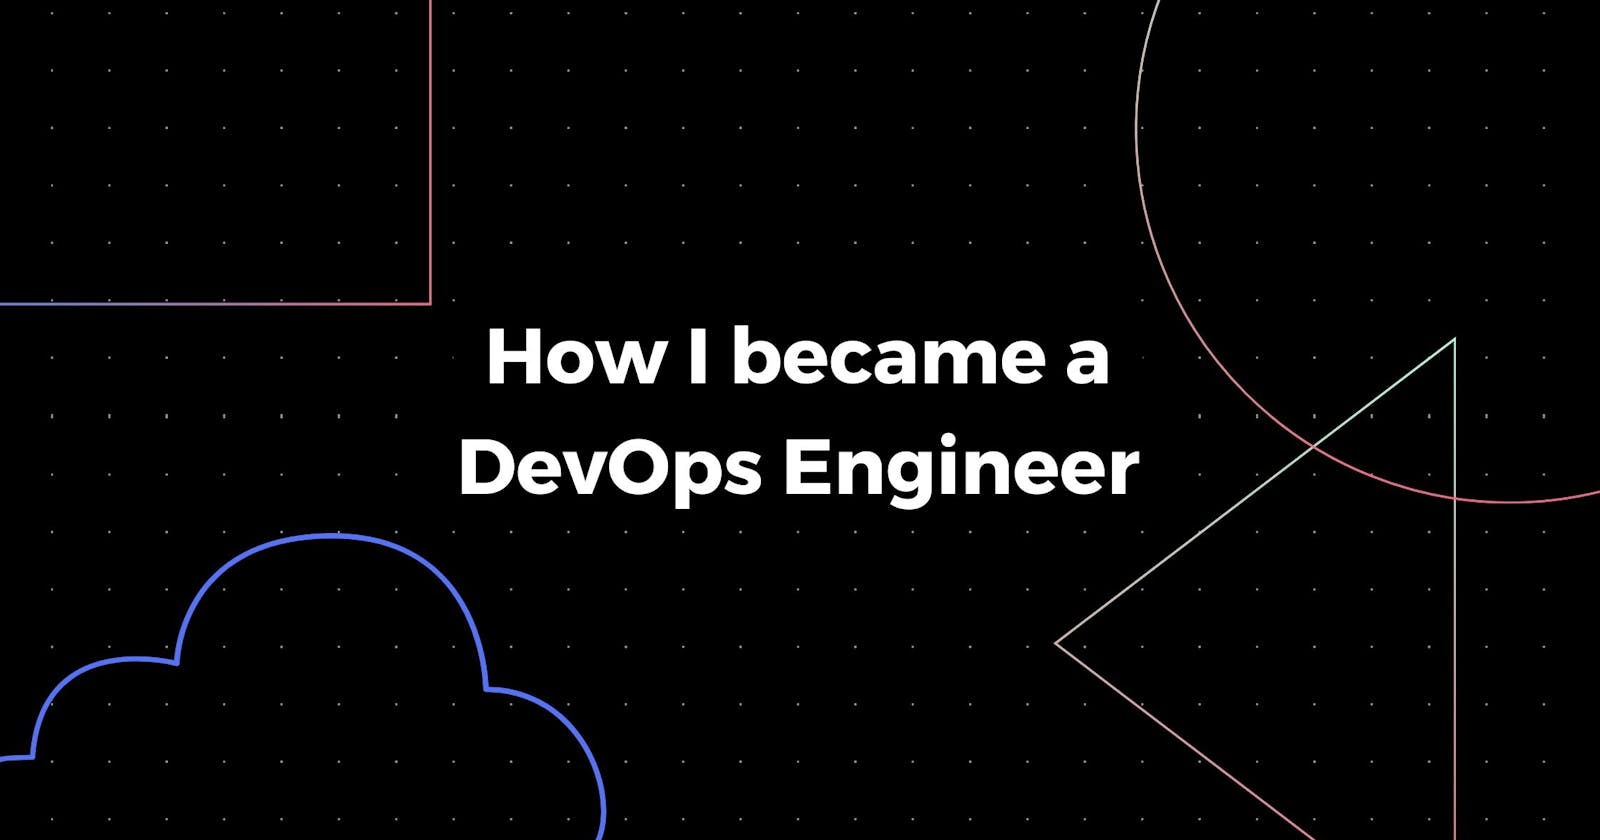 How did I become a DevOps Engineer